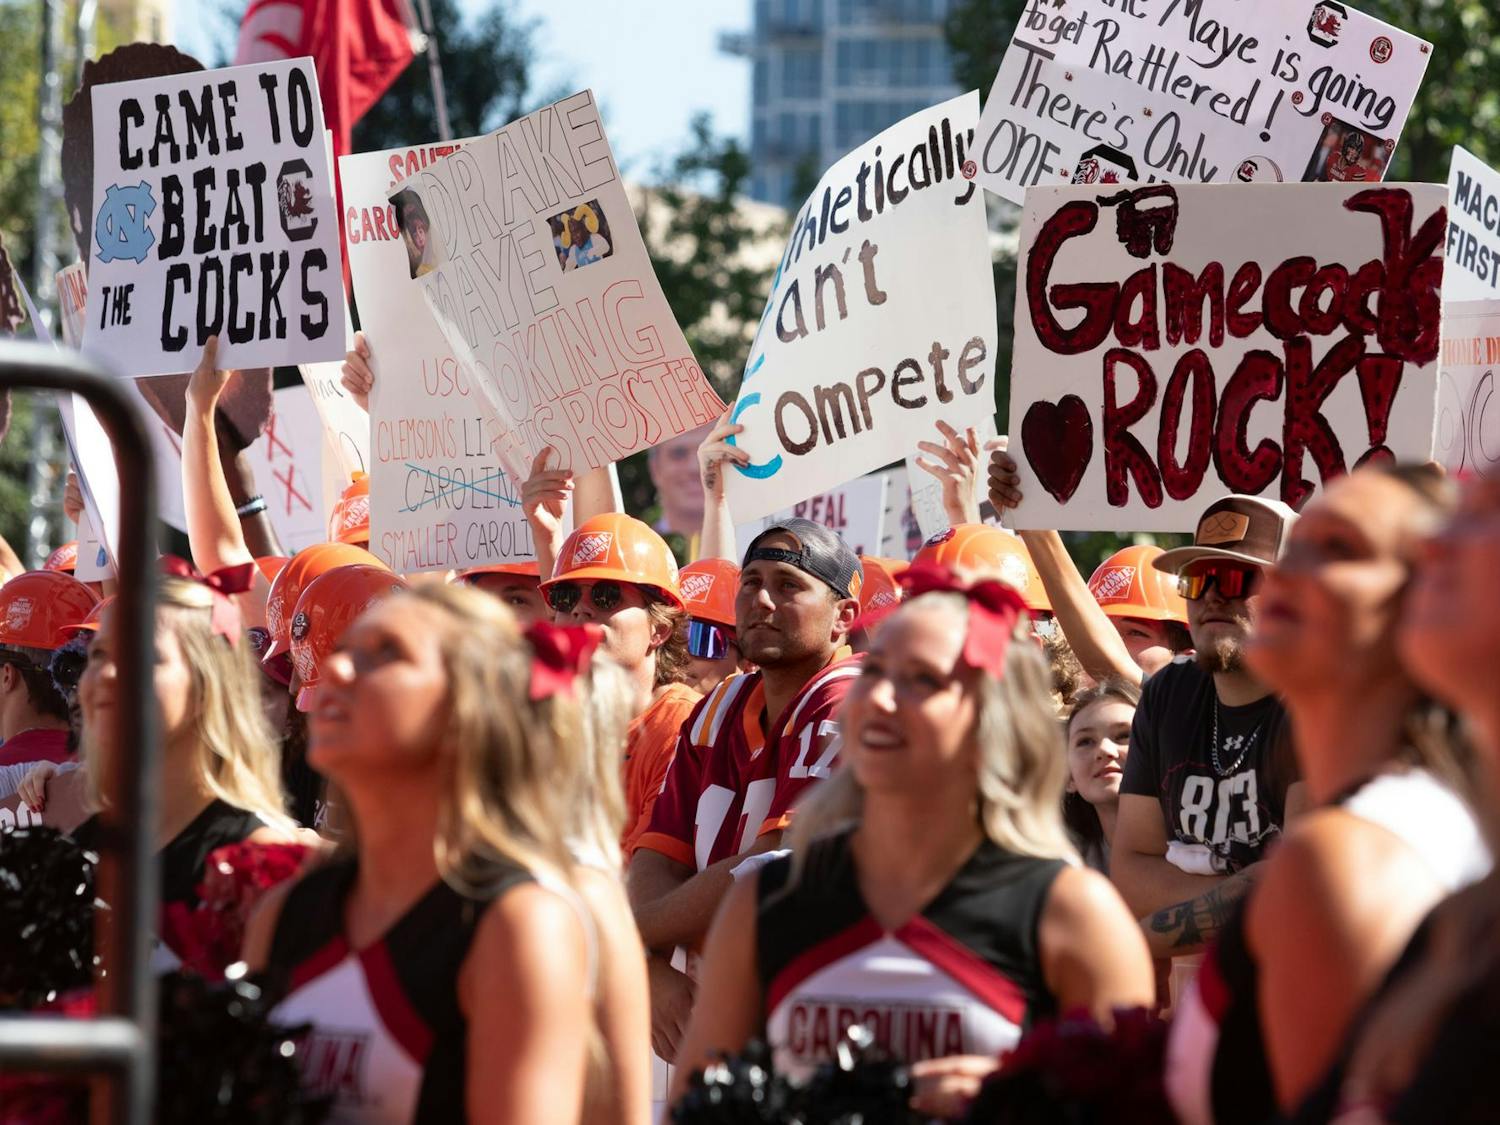 ESPN's College GameDay broadcast came to Charlotte, N.C., on Sept. 2, 2023. Fans of both the South Carolina Gamecocks and the North Carolina Tar Heels filled Romare Bearden Park in anticipation of the game between the two schools, with some arriving as early as 3 a.m ahead of the 9 a.m. show and 7:30 p.m. game.